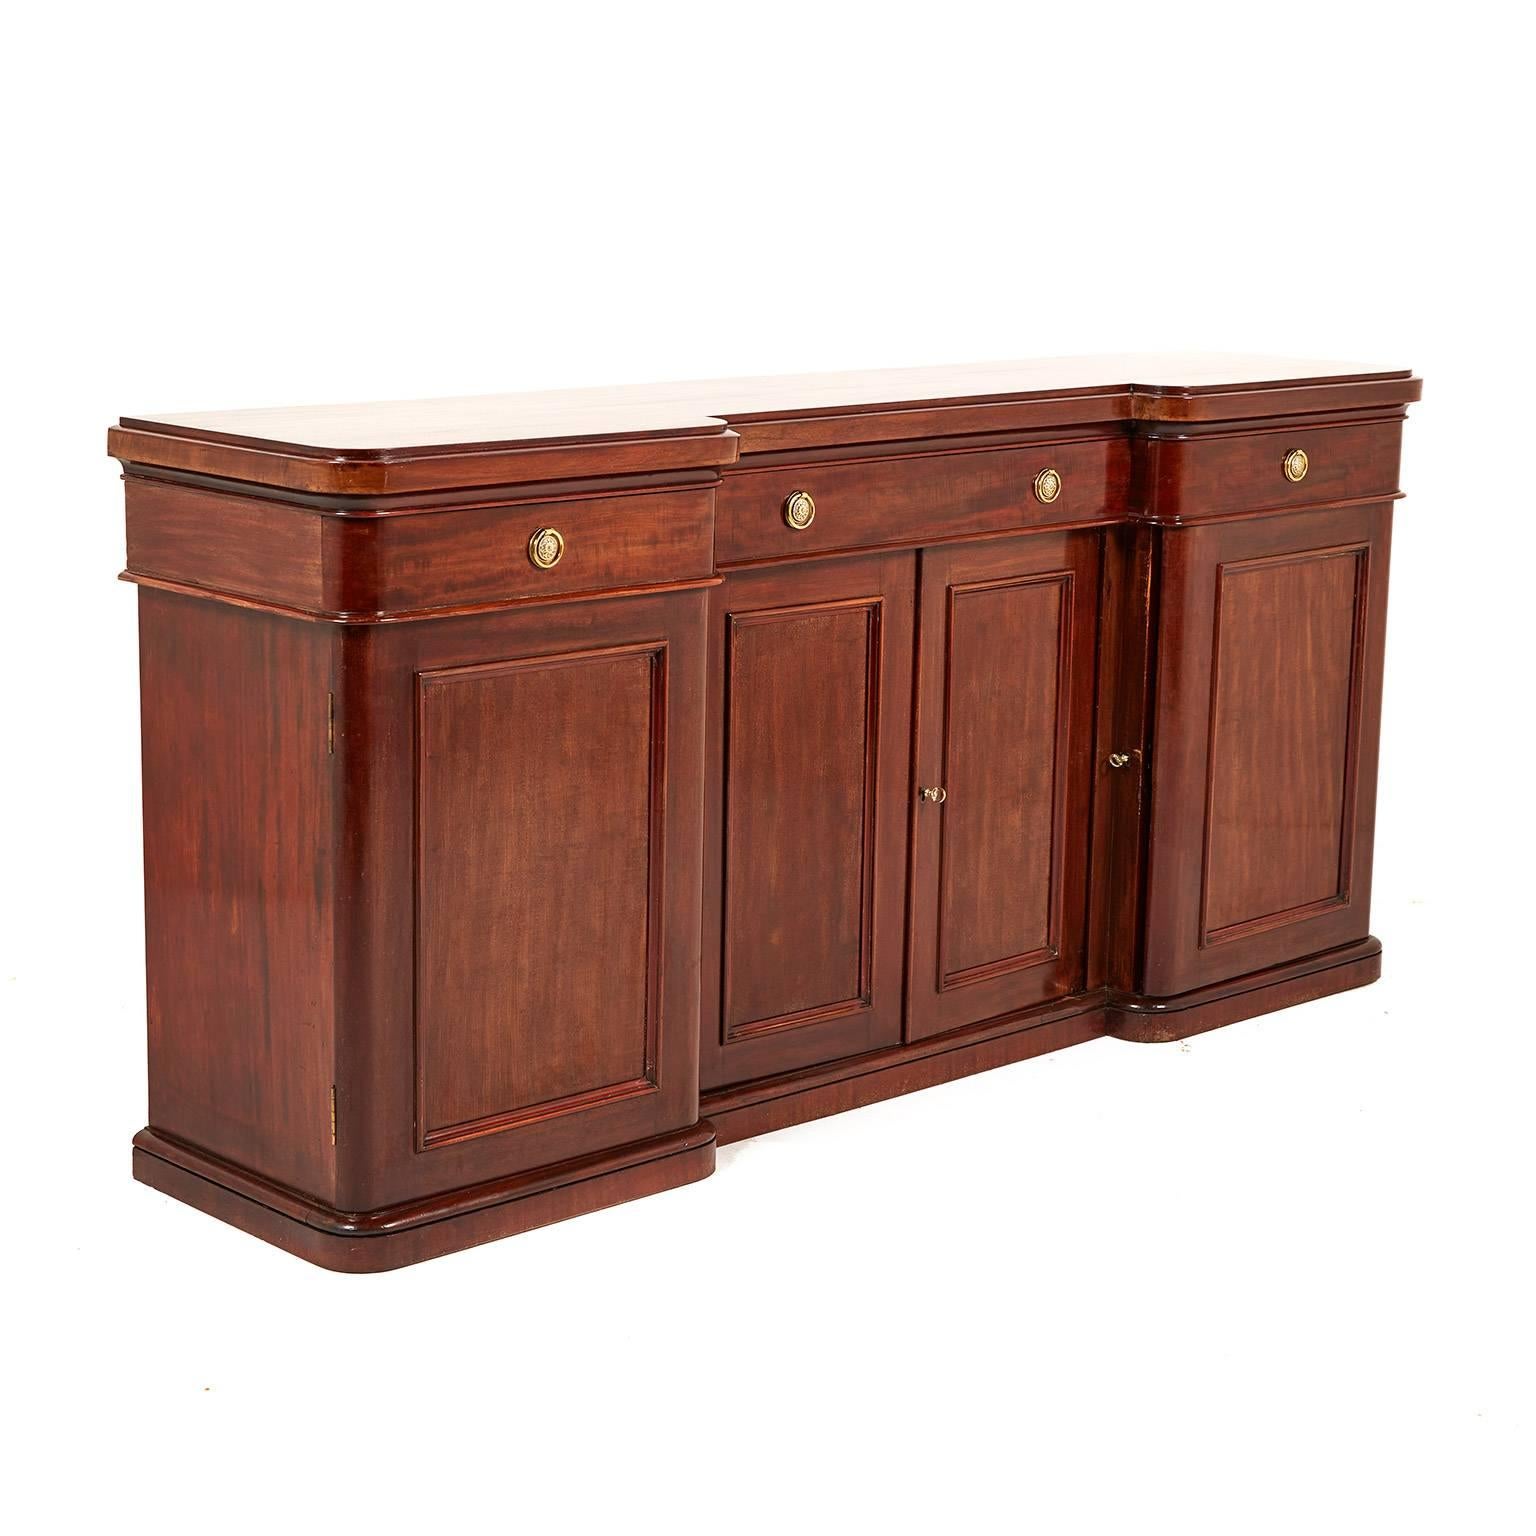 English mahogany four-door sideboard. Elegant lines and beautifully finished. Brass knobs set off the rich patina of the mahogany perfectly. Plenty of storage, too. Works in a number of rooms in the home, circa 1880.


 